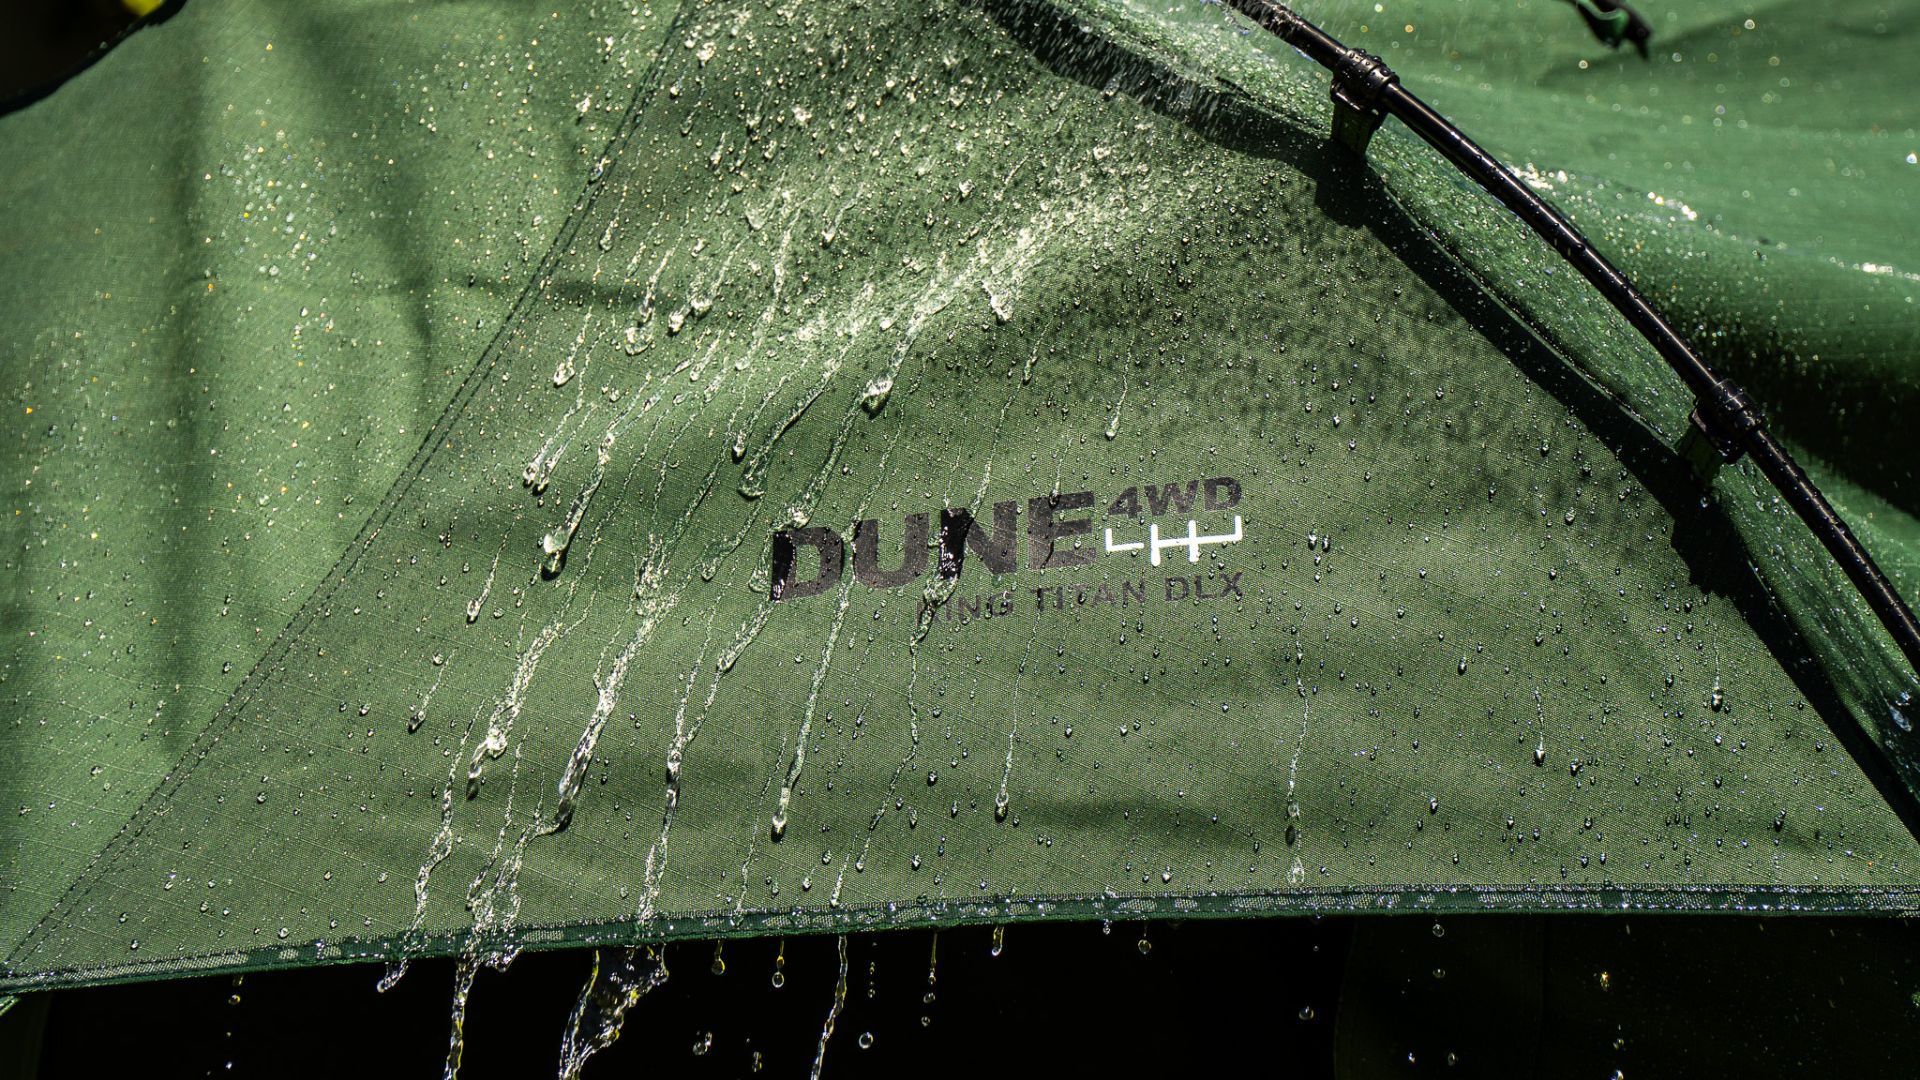 Inspect your Dune 4WD King Titan Deluxe Double Swag for full waterproofness